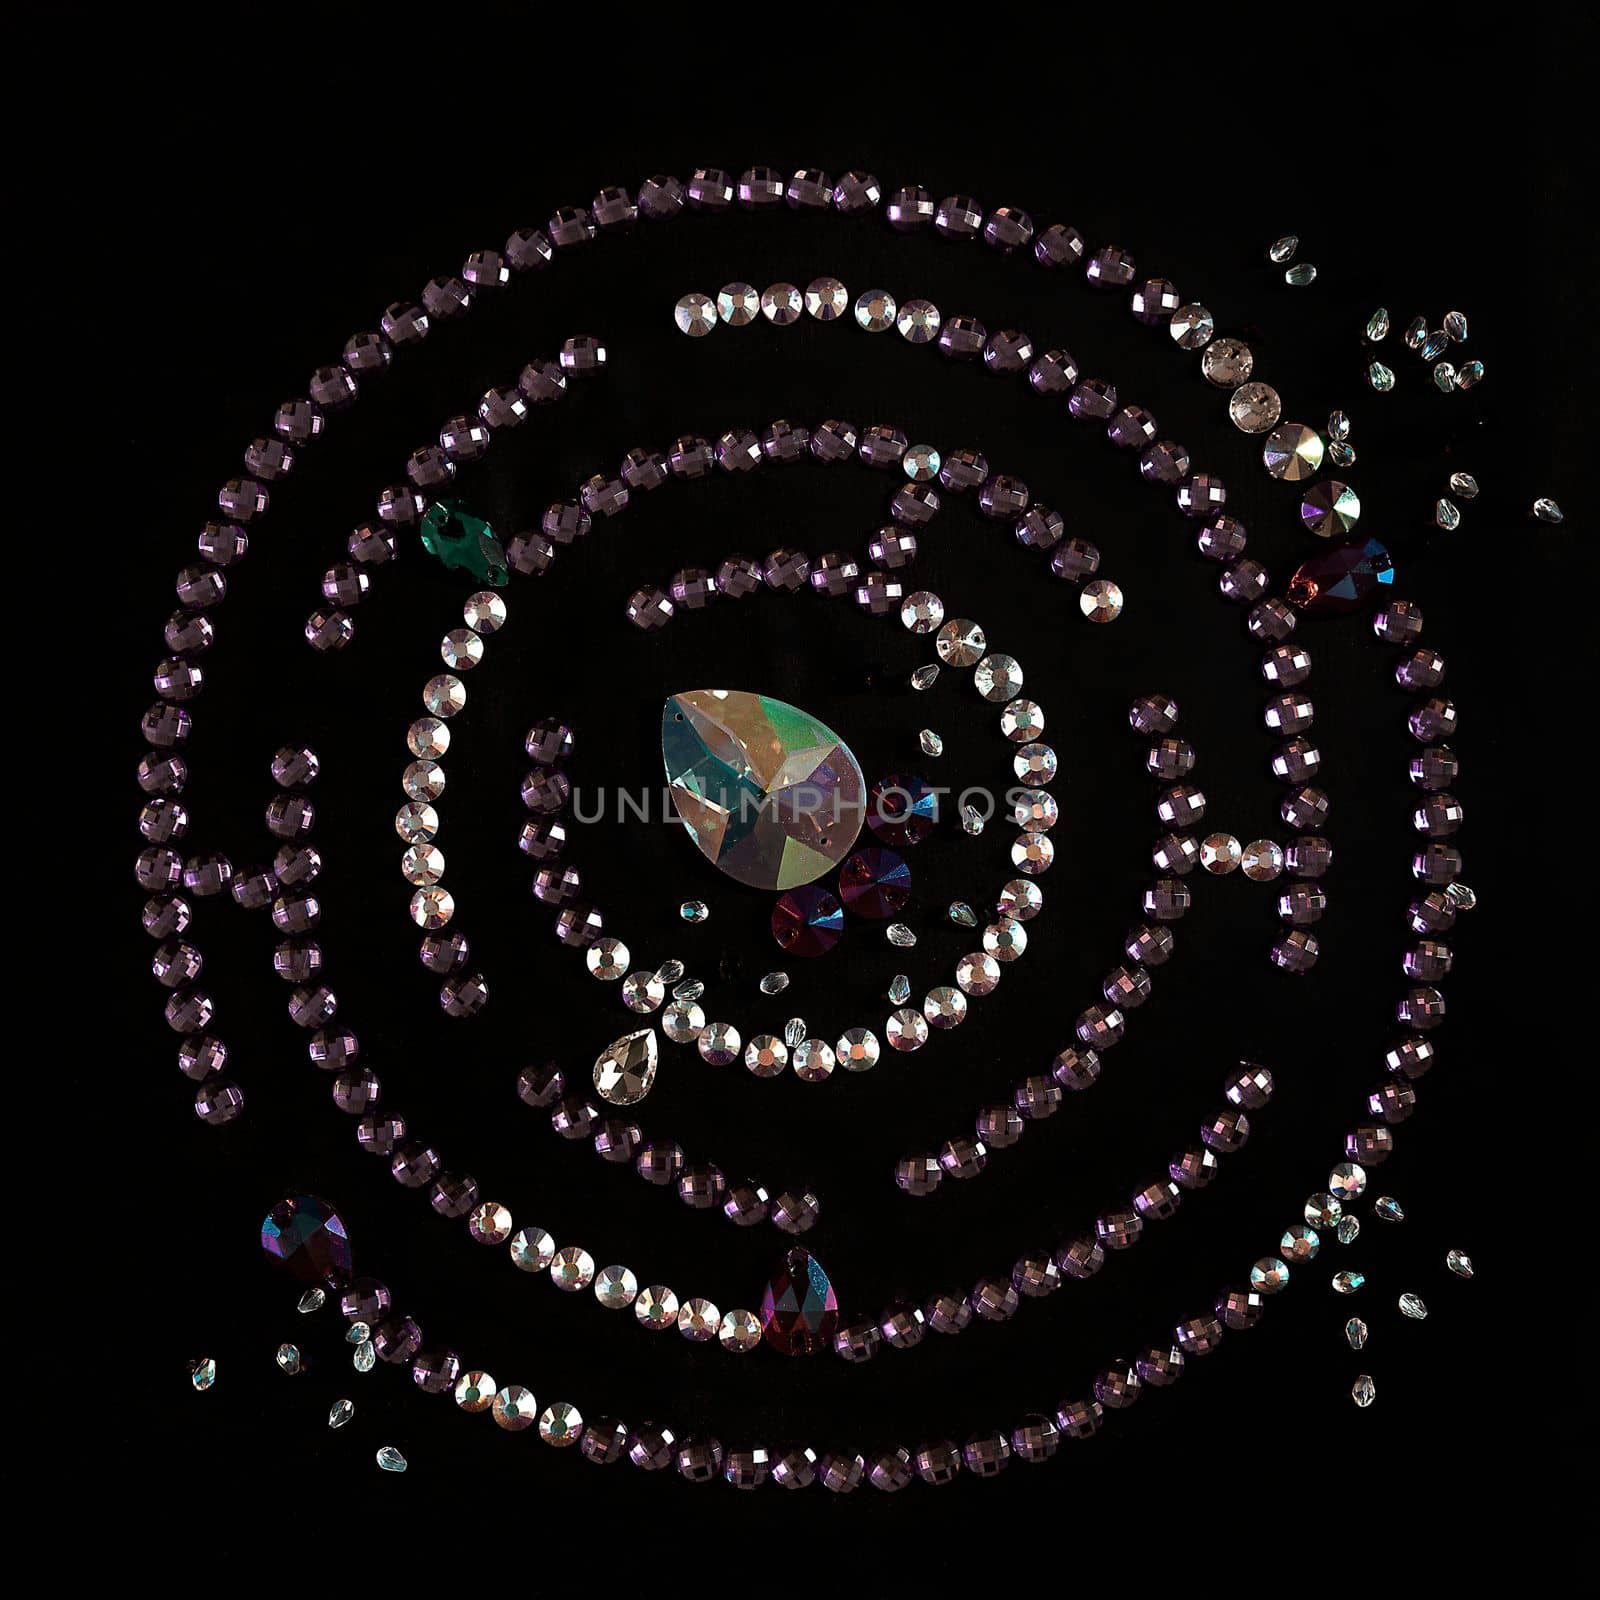 Rhinestones in the form of a labyrinth with a flat lay, isolated on a black background. Top view pattern or labyrinth of rhinestones in lilac and silver color